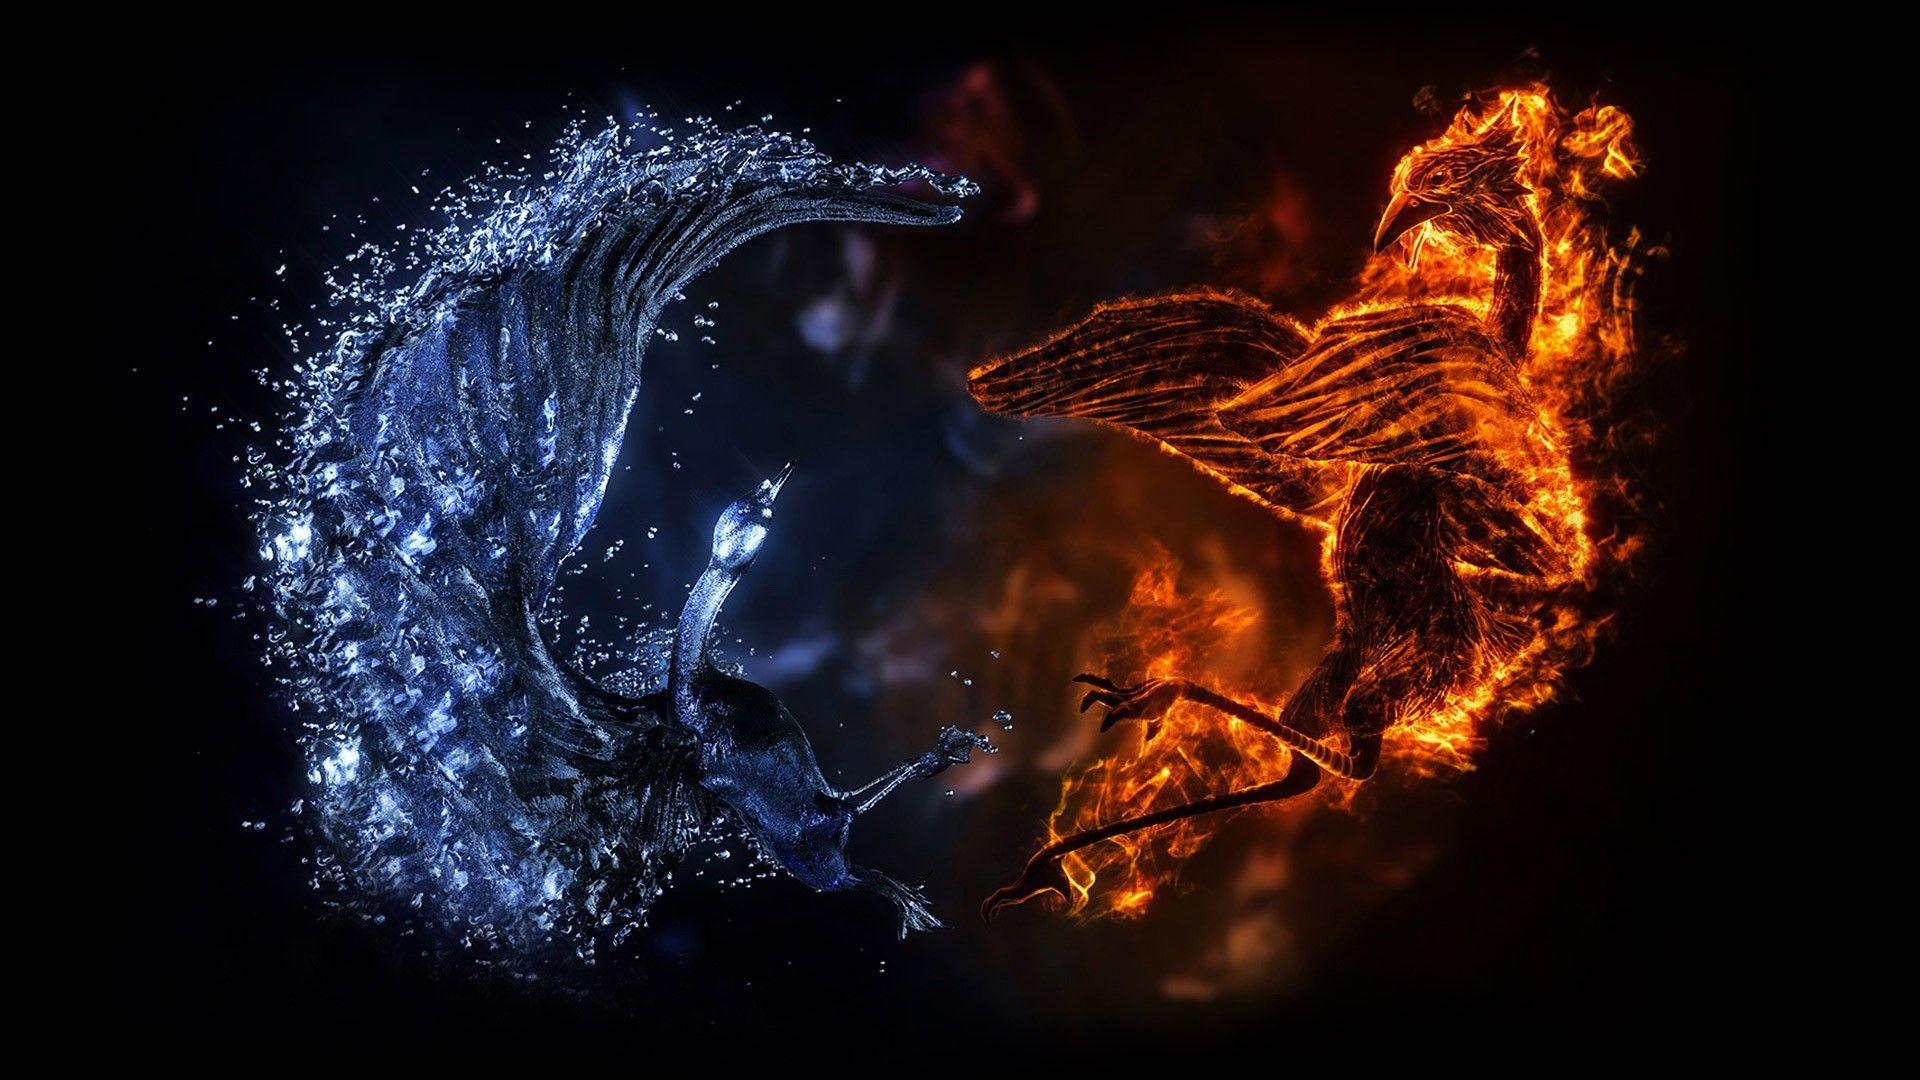 Battle of fire and water dragons wallpaper and image